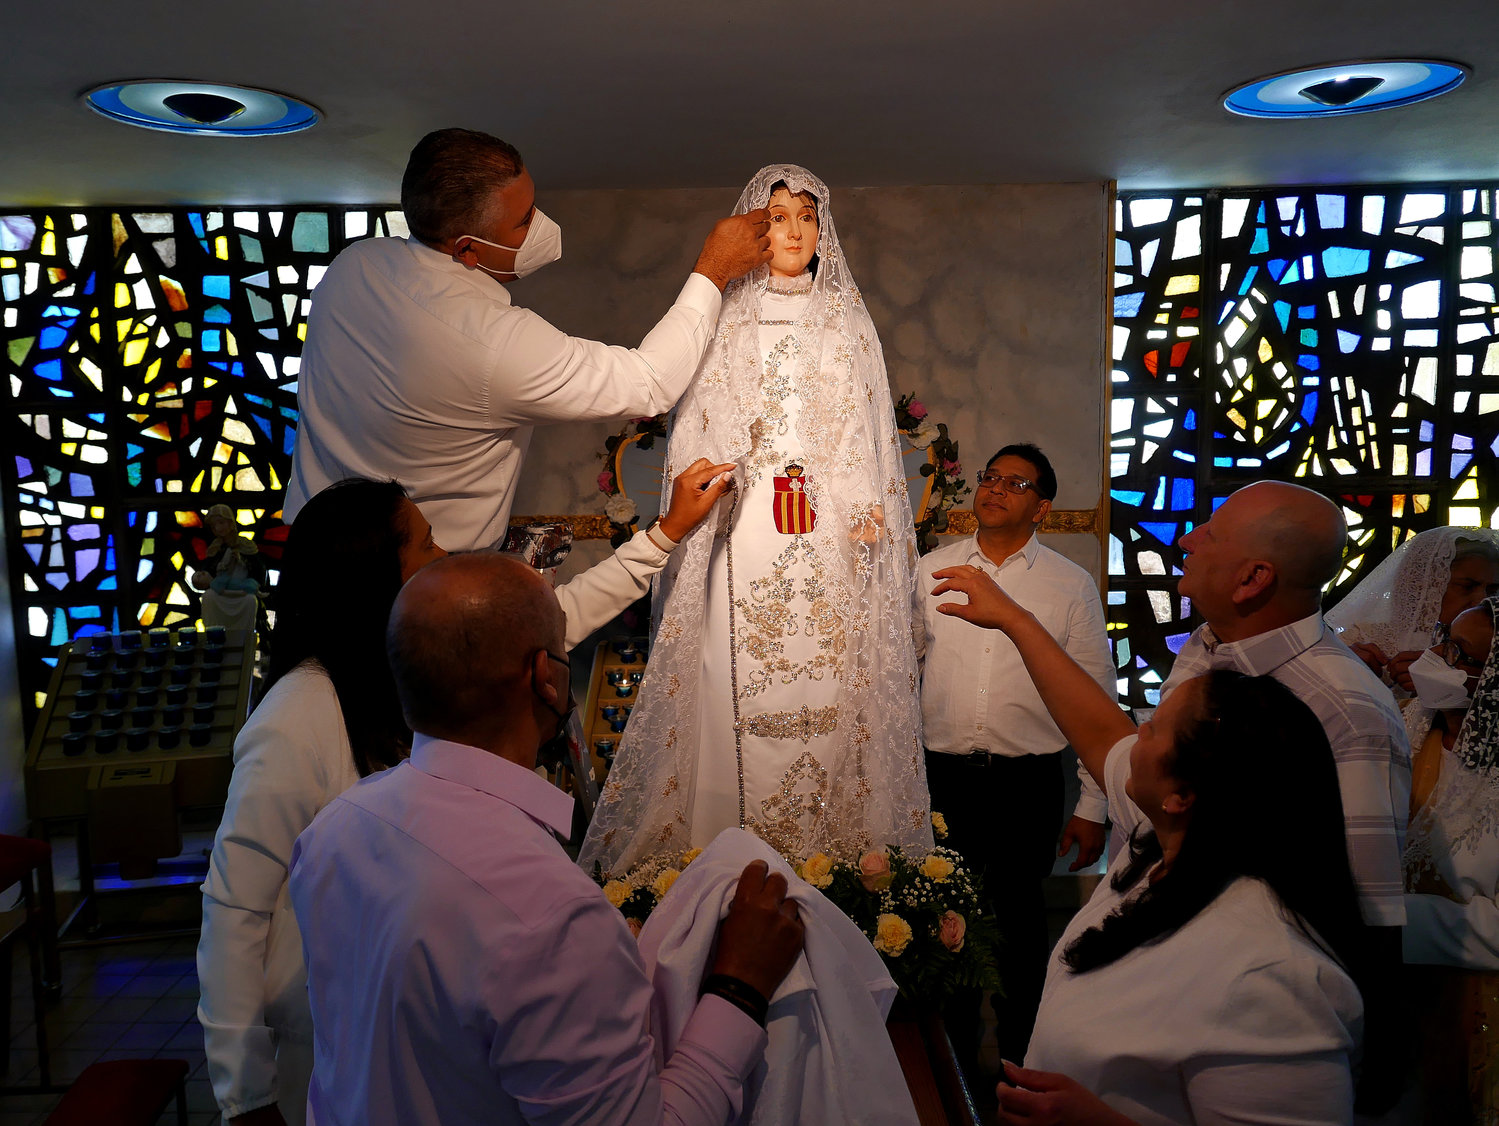 A new Our Lady of Mercy statue was featured during the May 1 Mass honoring Mary under that title at Holy Cross parish in the Bronx. Parishioners tend to the statue’s veil. Our Lady of Mercy is patroness of Spain, the Dominican Republic and other Latin American countries. Holy Cross parish has a large Dominican population.